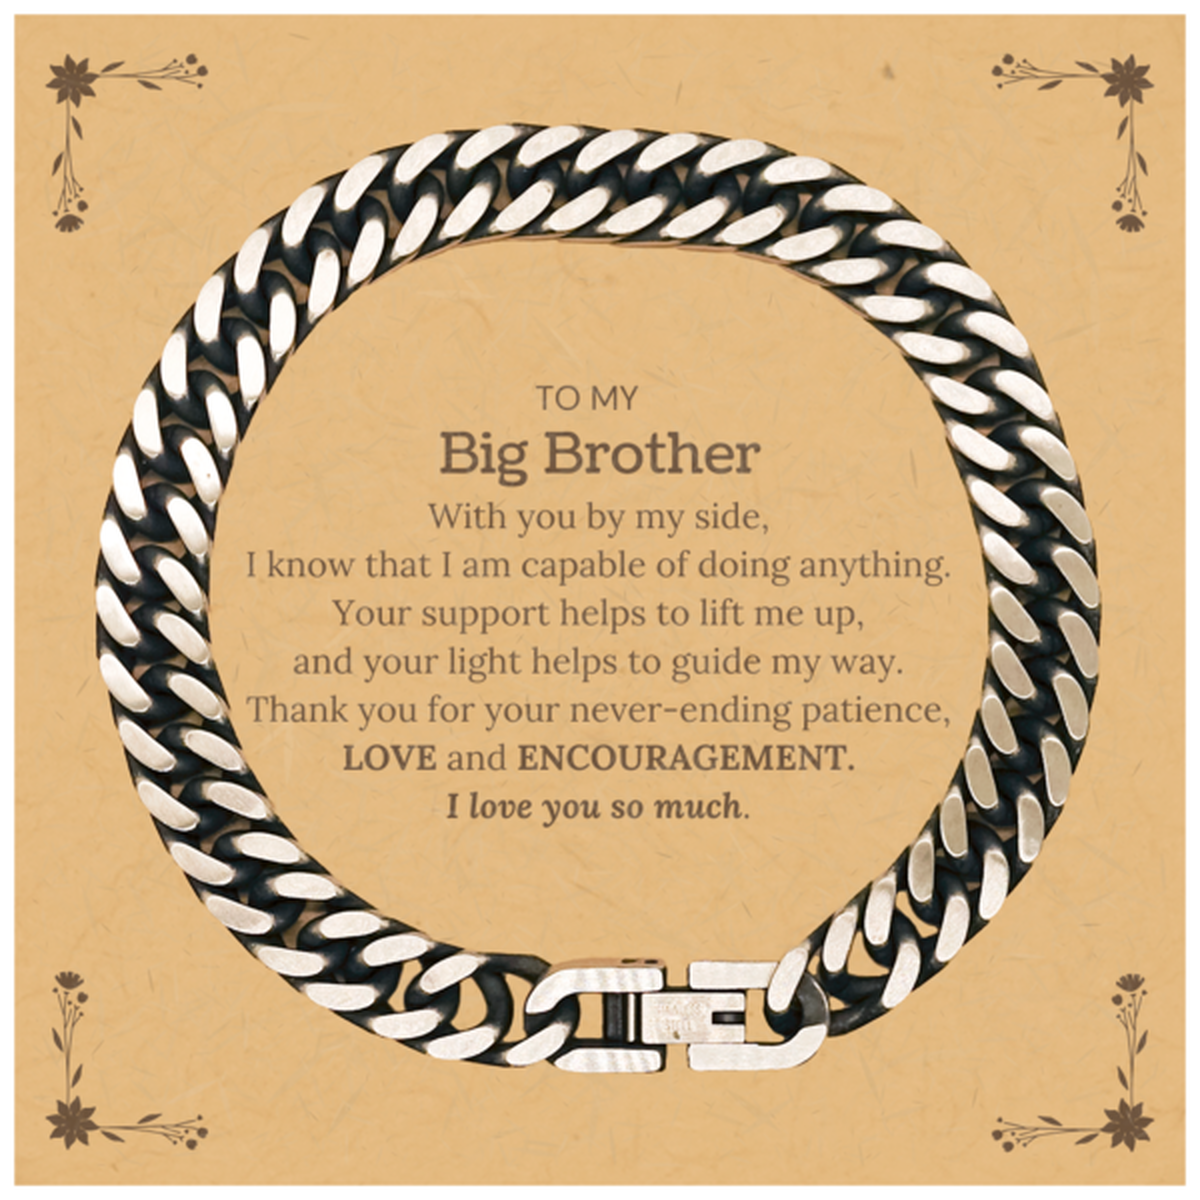 Appreciation Big Brother Cuban Link Chain Bracelet Gifts, To My Big Brother Birthday Christmas Wedding Keepsake Gifts for Big Brother With you by my side, I know that I am capable of doing anything. I love you so much